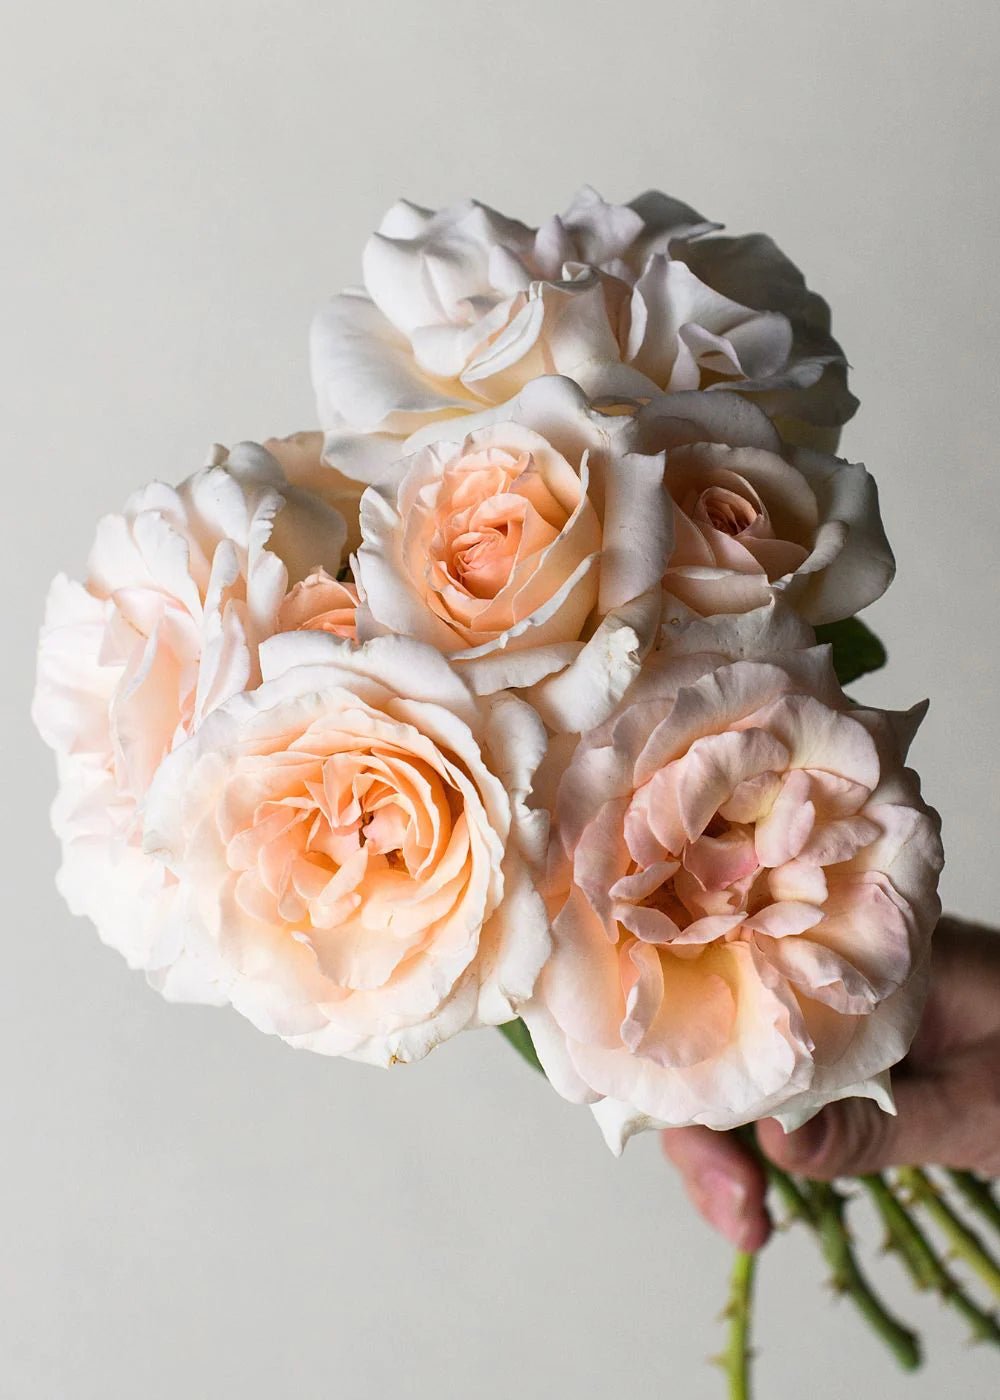 Cut Flower Bare Root Rose Collection - Menagerie Farm & Flower